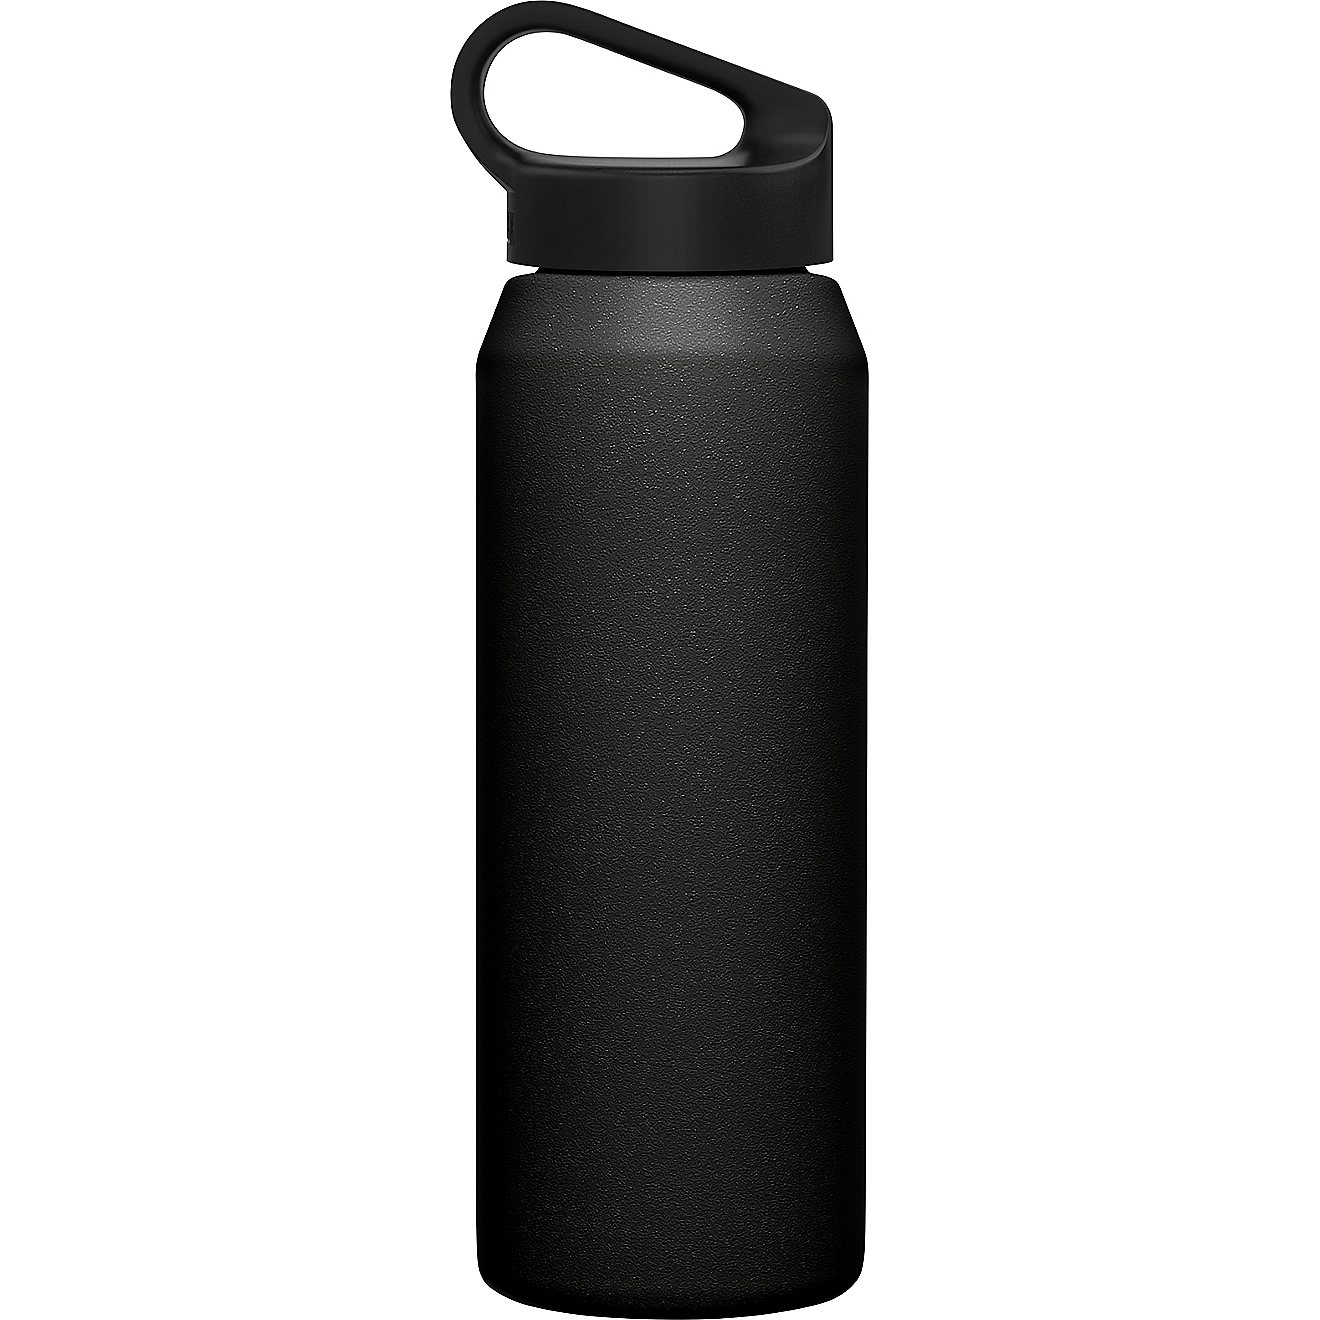 CamelBak Carry Cap 32 oz Insulated Stainless Steel Water Bottle                                                                  - view number 4